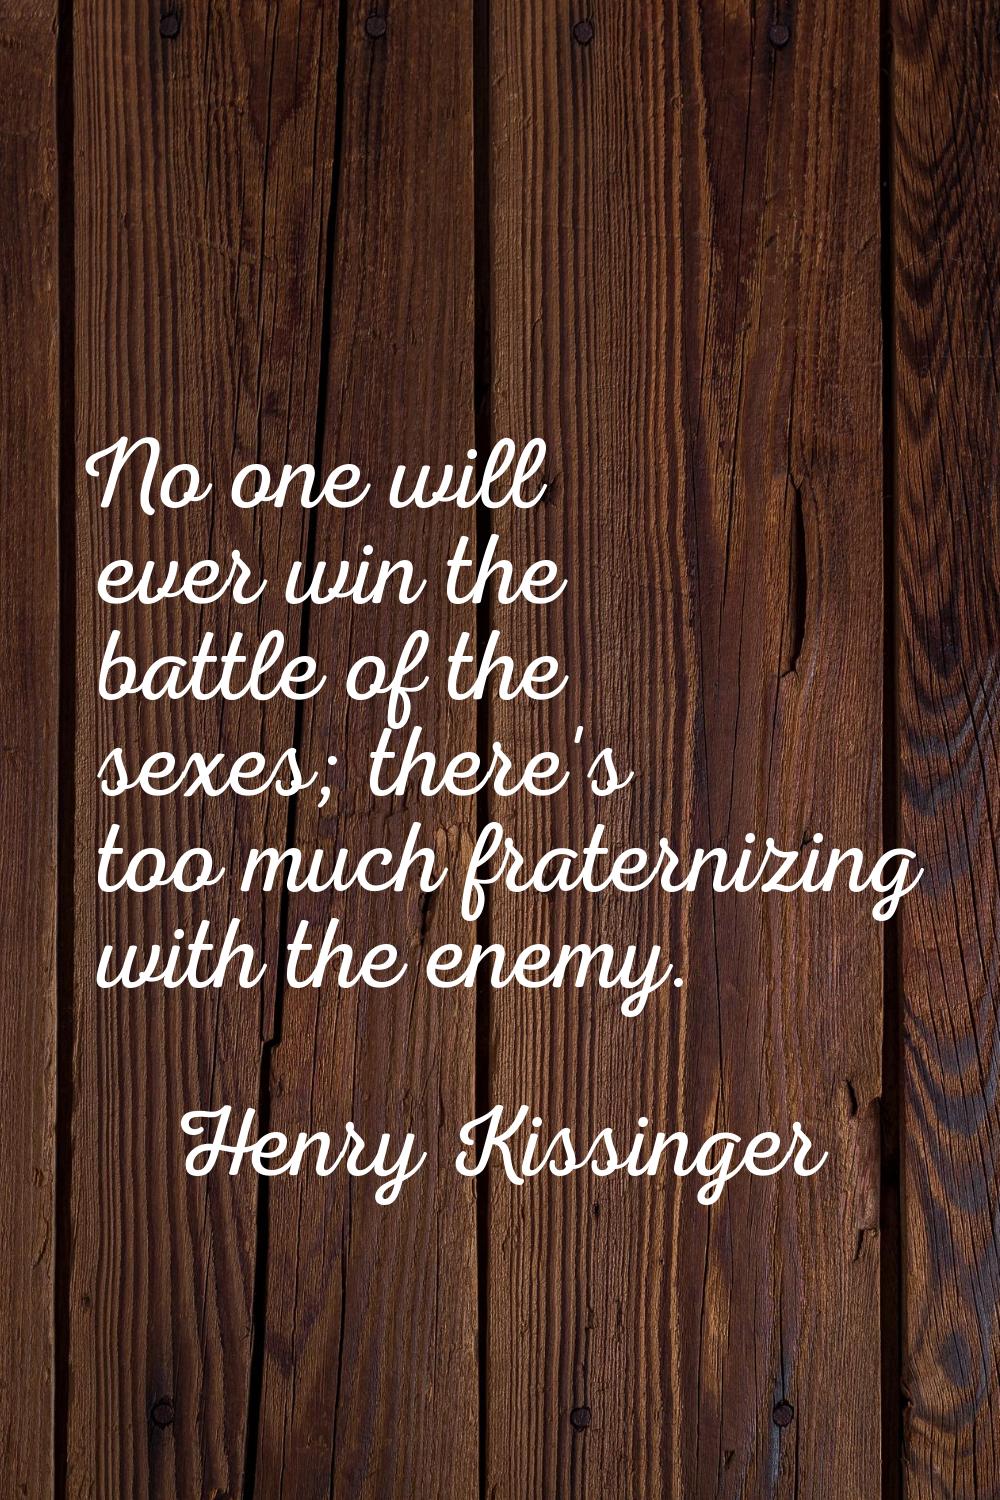 No one will ever win the battle of the sexes; there's too much fraternizing with the enemy.